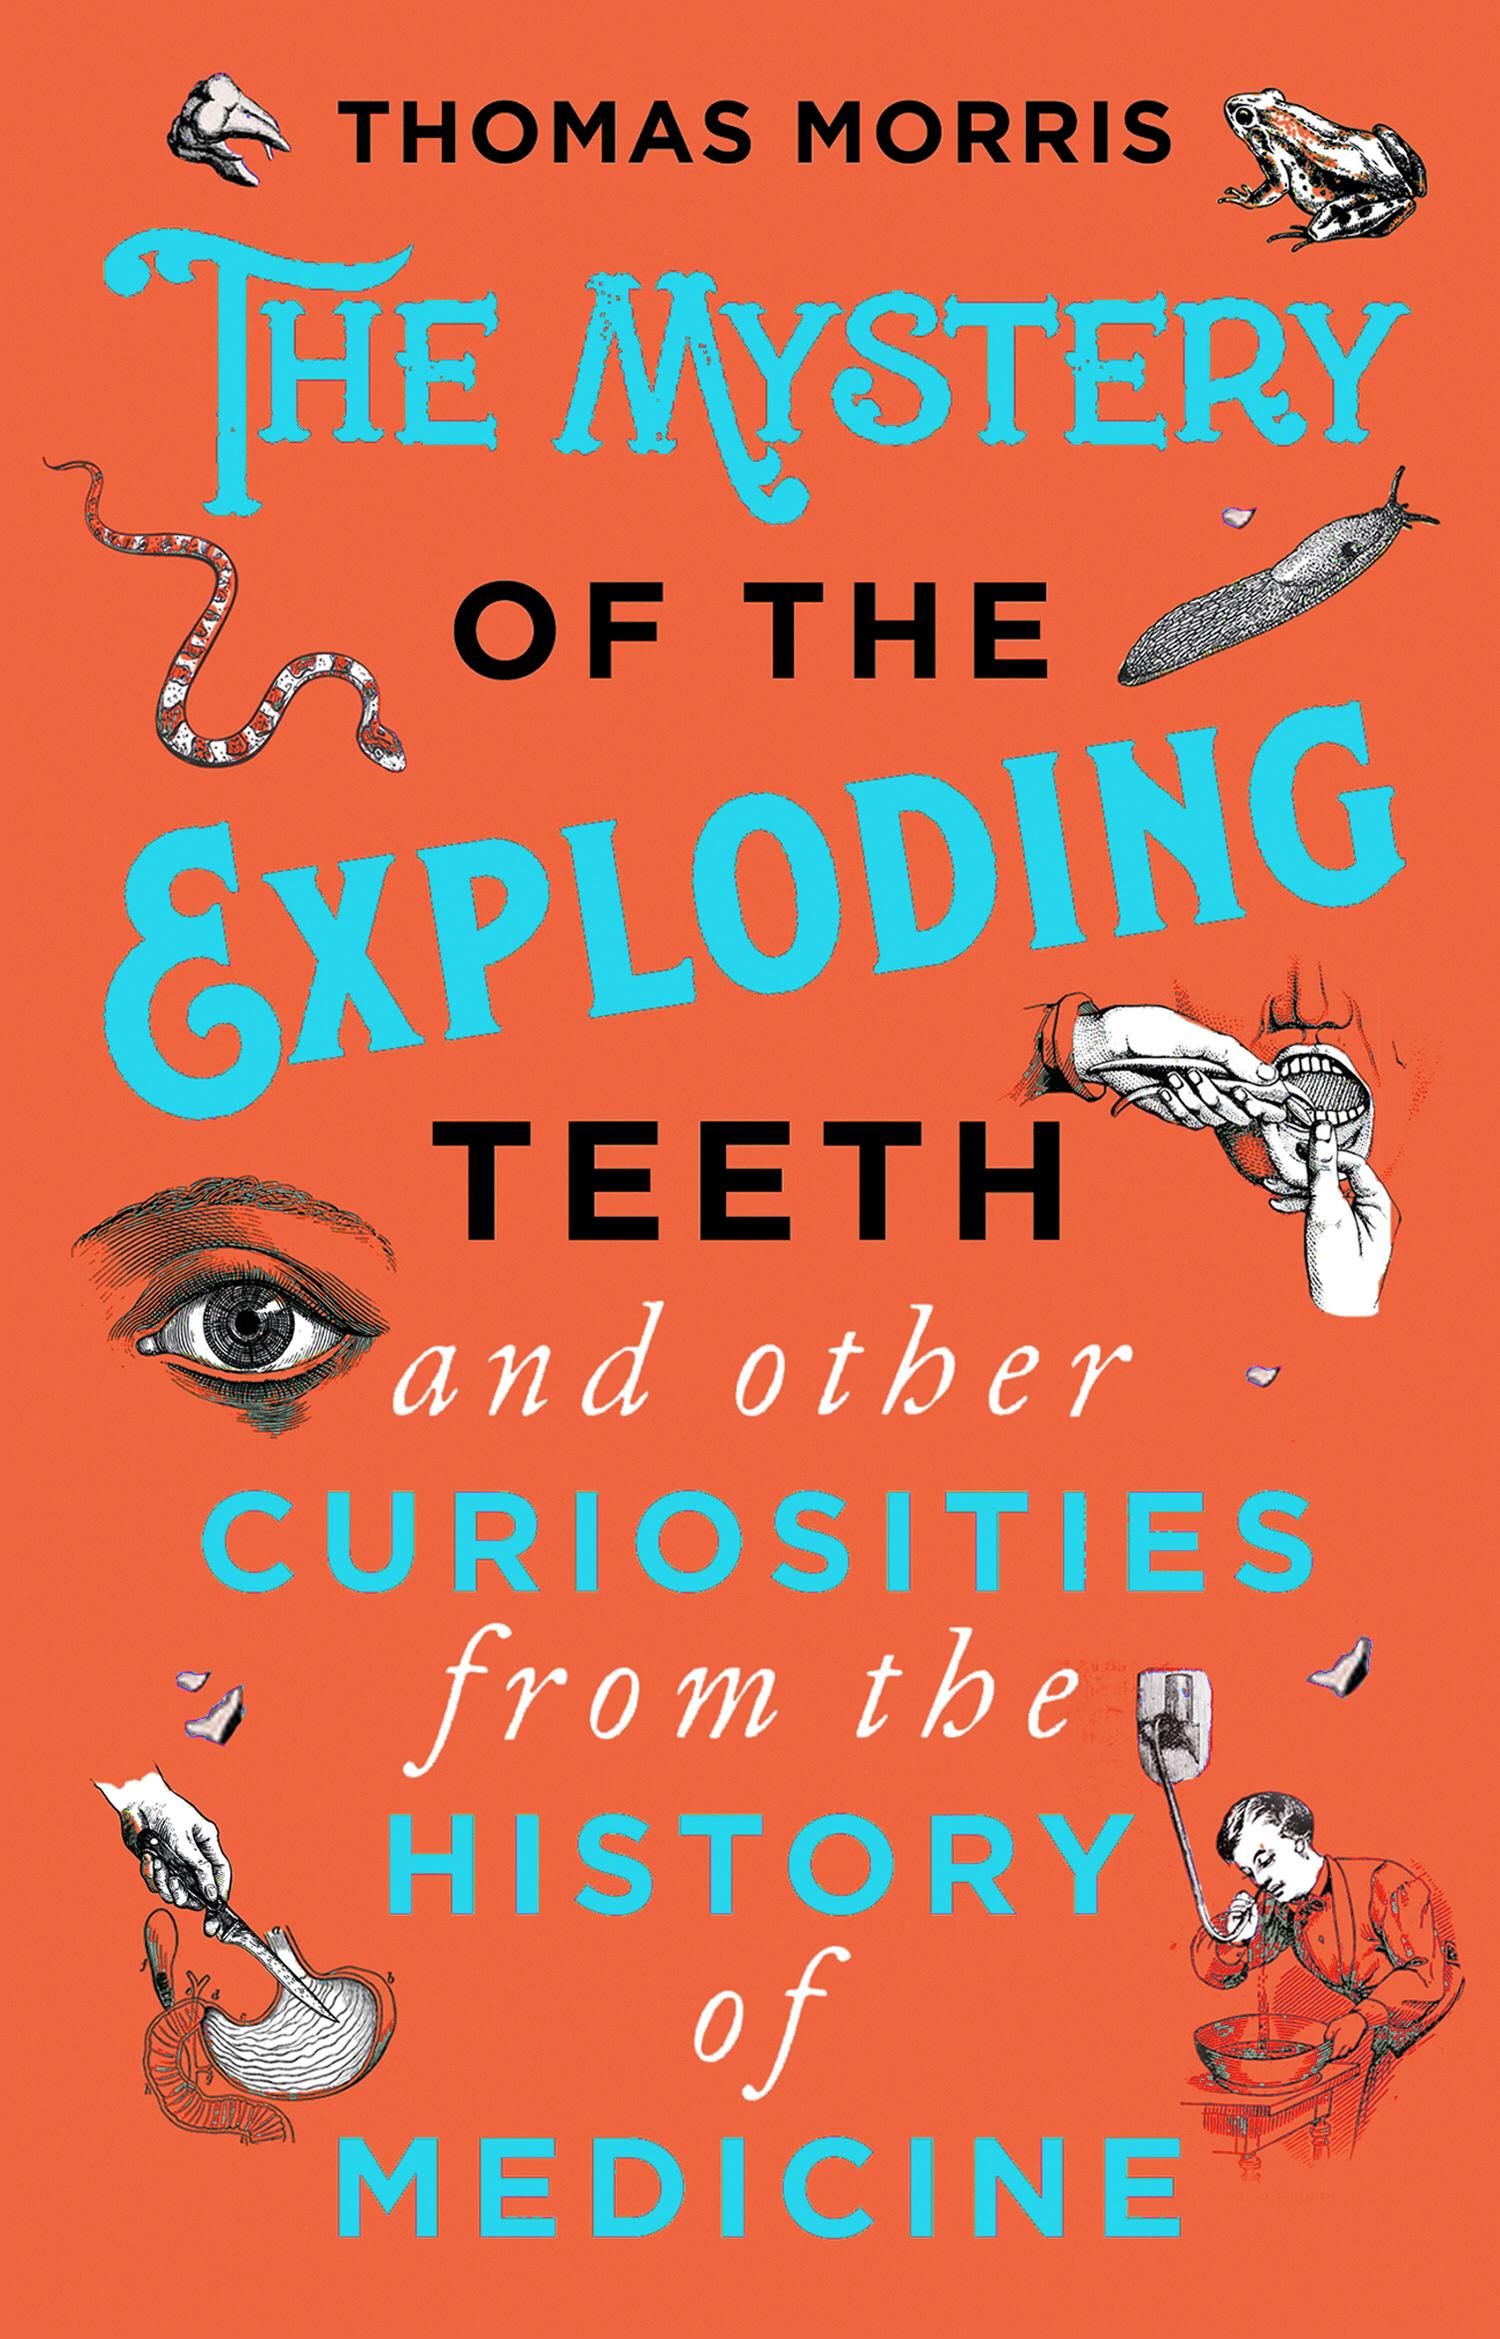 Mystery of the Exploding Teeth and Other Curiosities from th - Thomas Morris